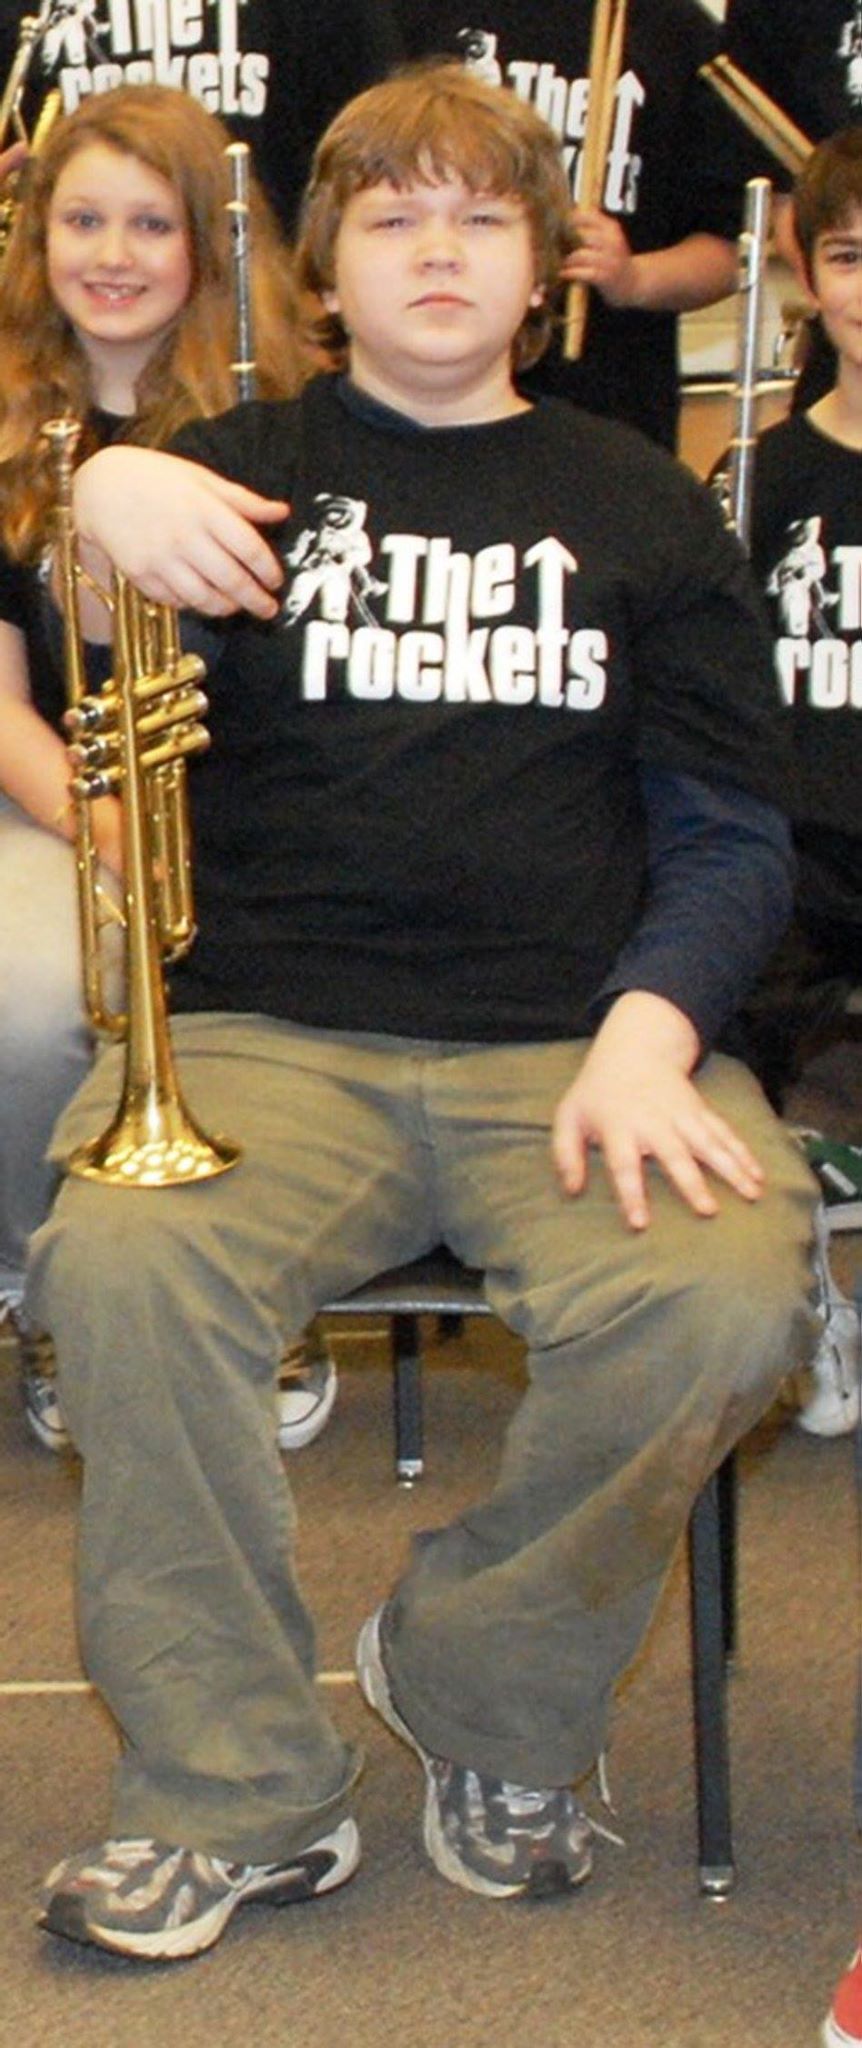 Middle School Students Recent Promotion To Jazz Band Guarantees A River Of Pussy